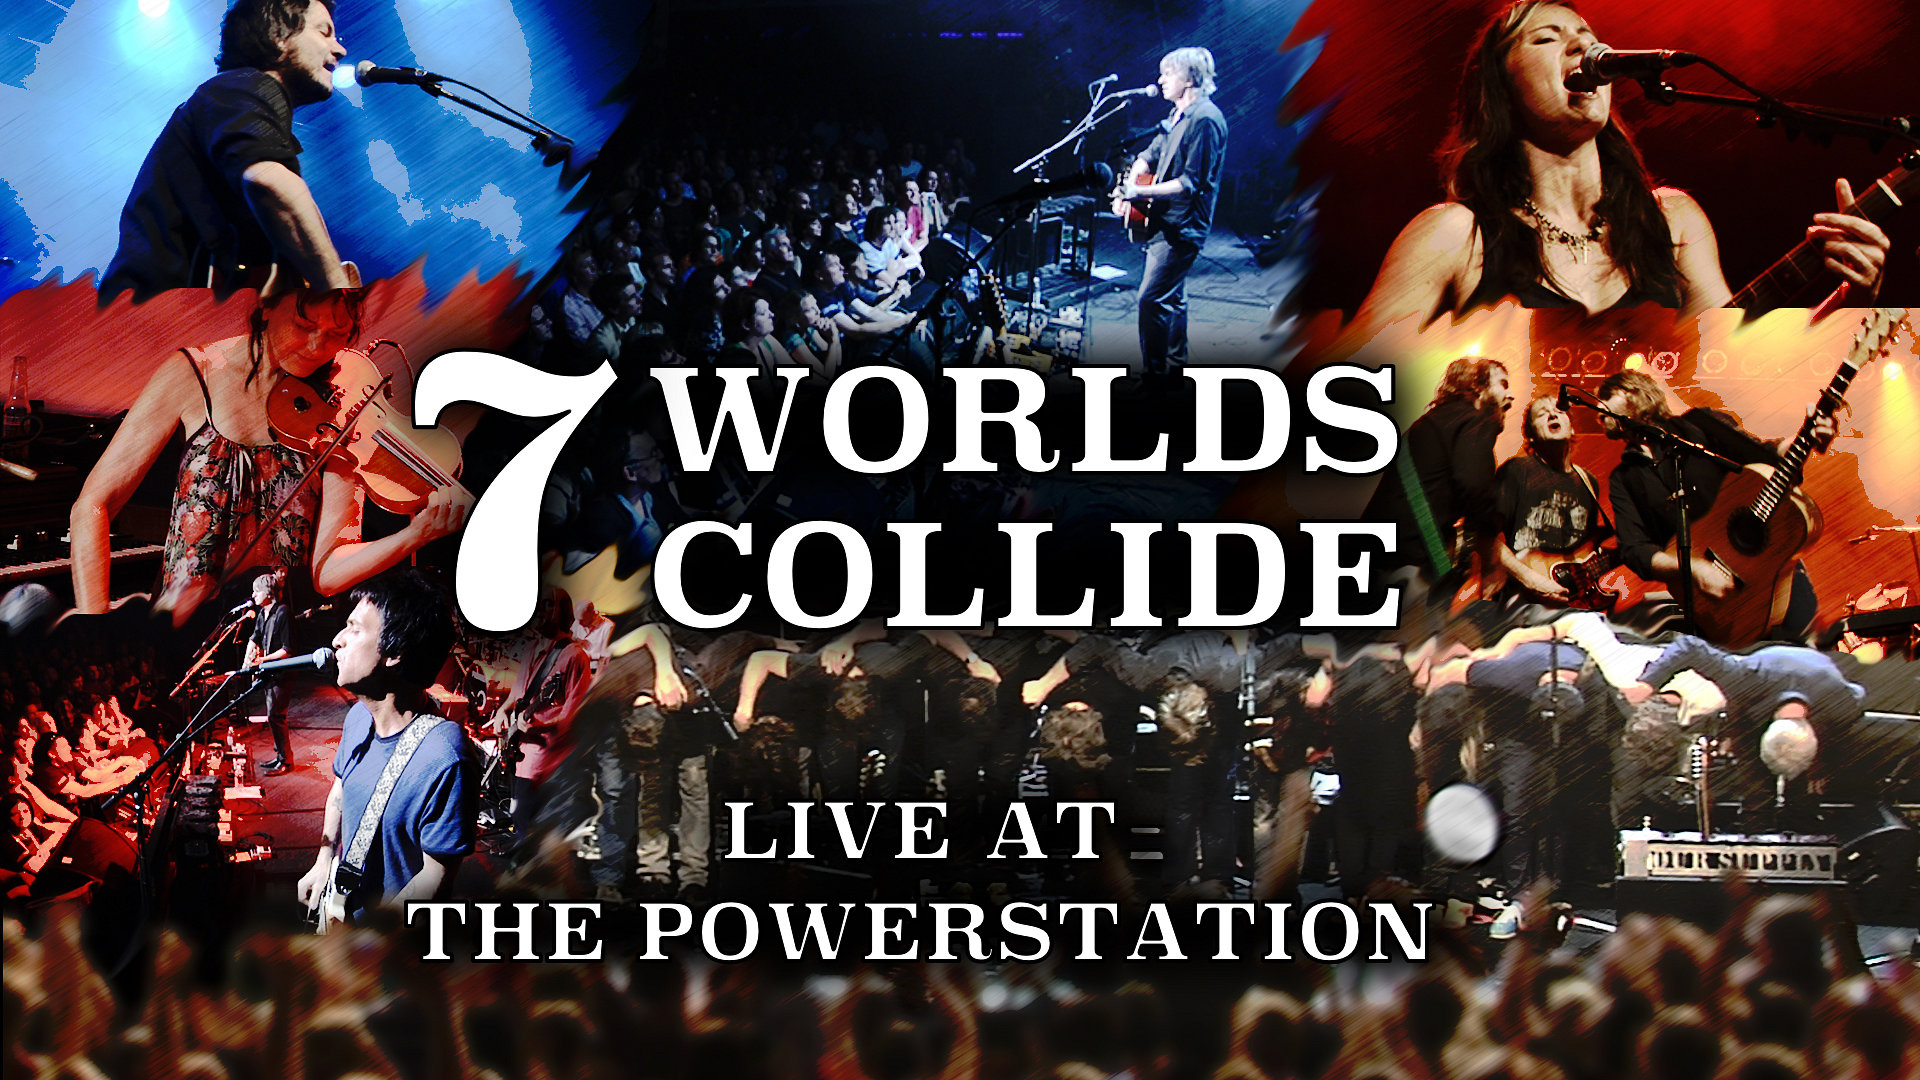 7 Worlds Collide - Live At The Powerstation